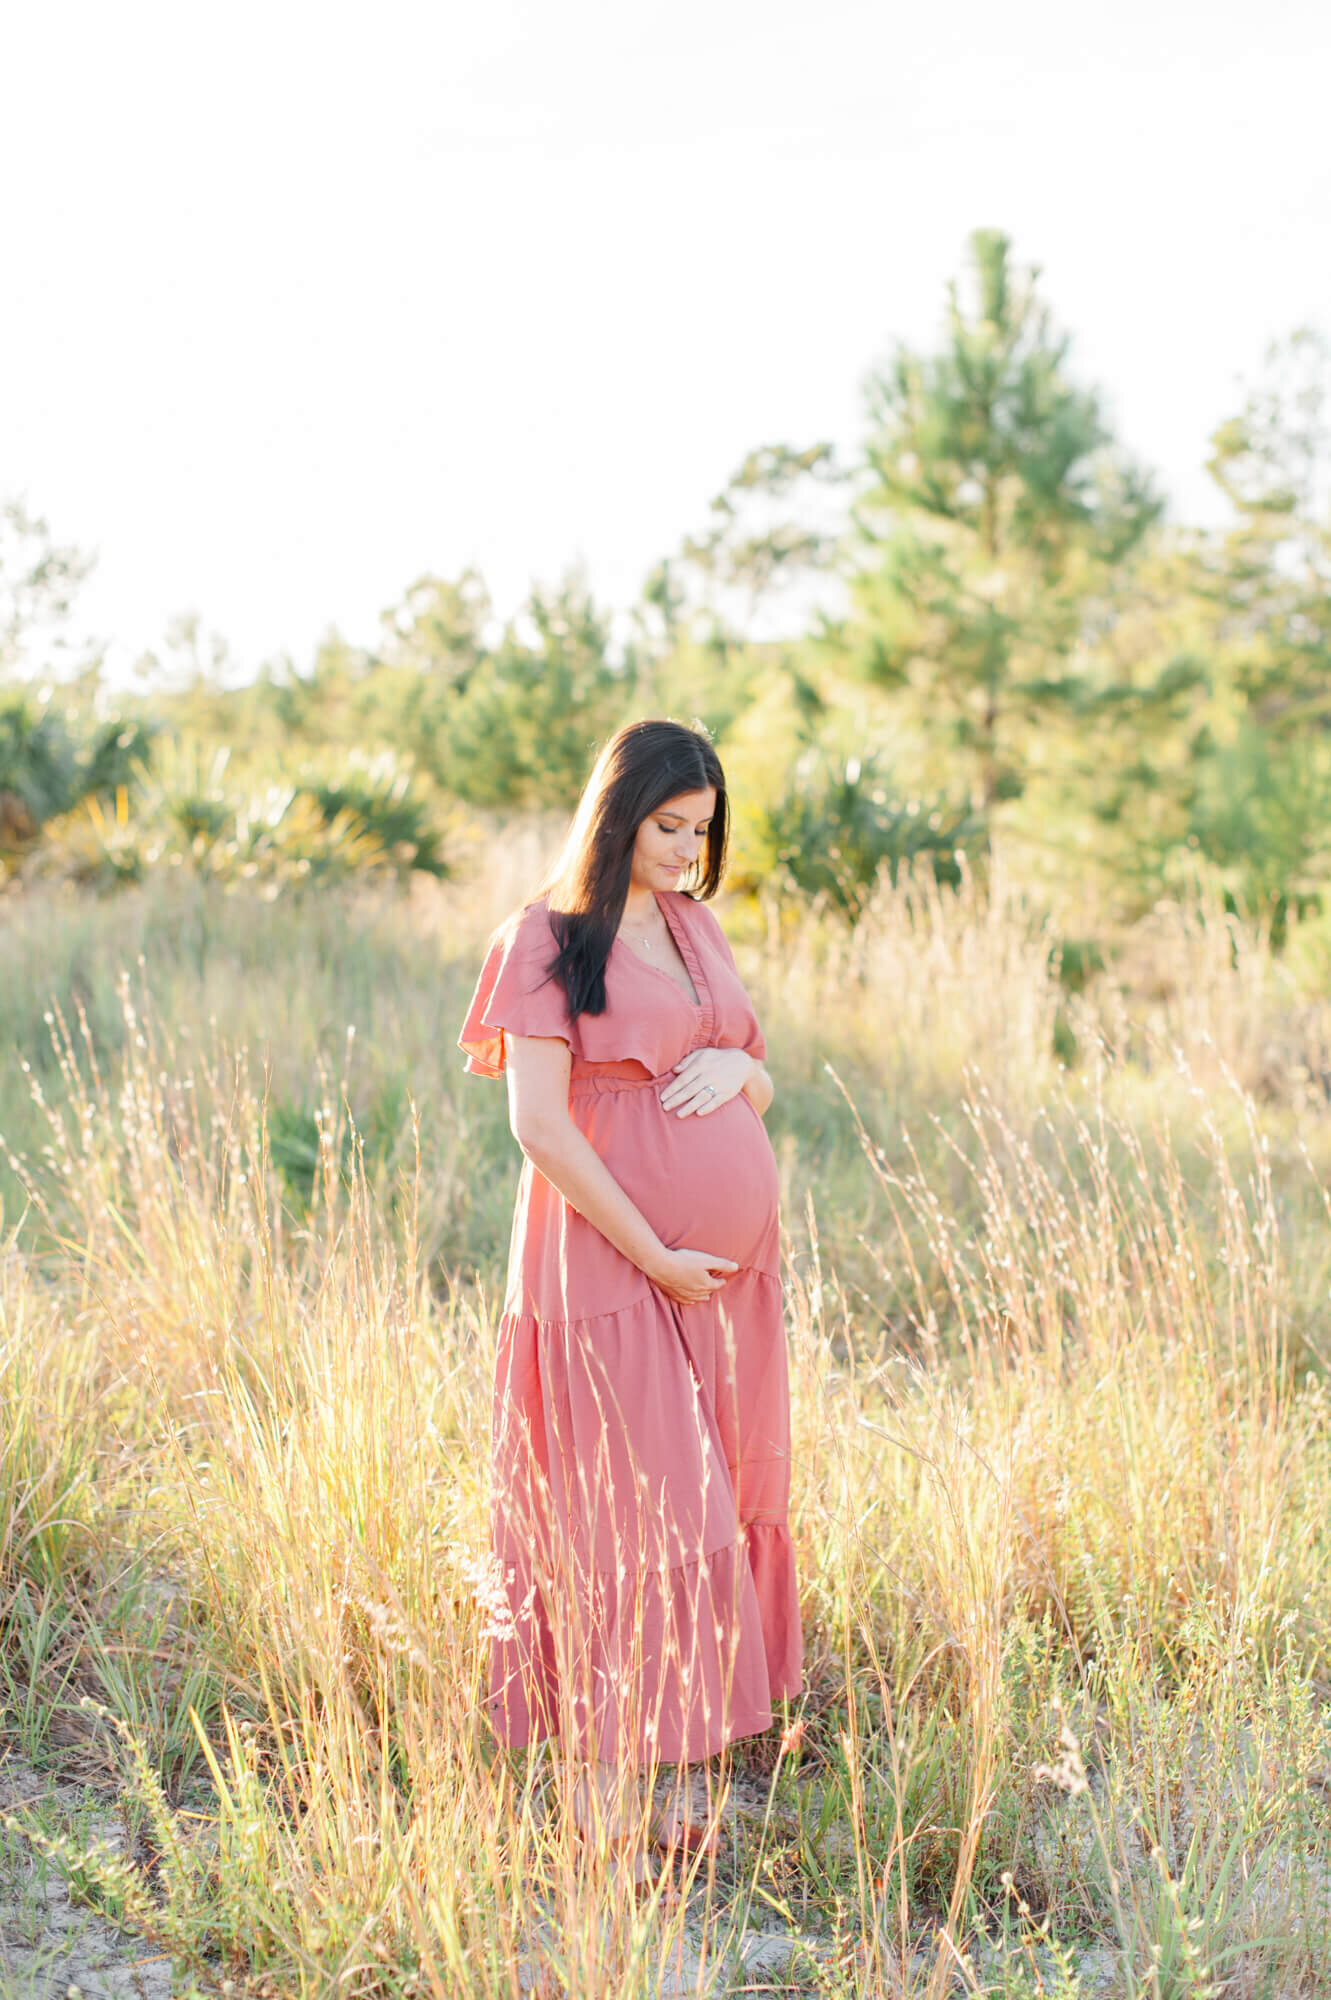 Beautiful mom in a tall grass field at sunset wearing a long pink dress